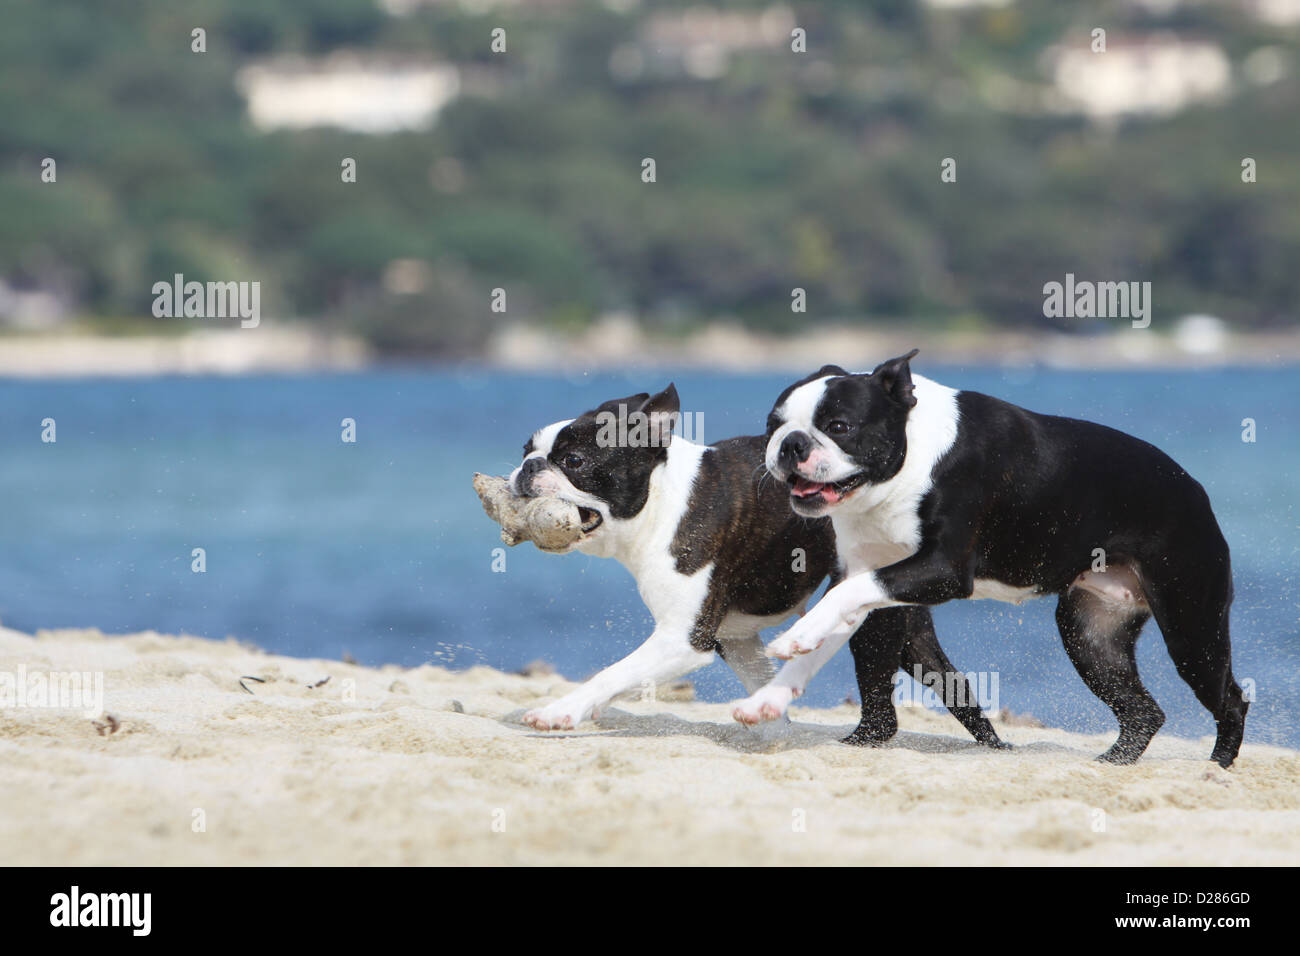 Dog Boston Terrier two adults different colors (white and brindle, black and white) running on the beach Stock Photo